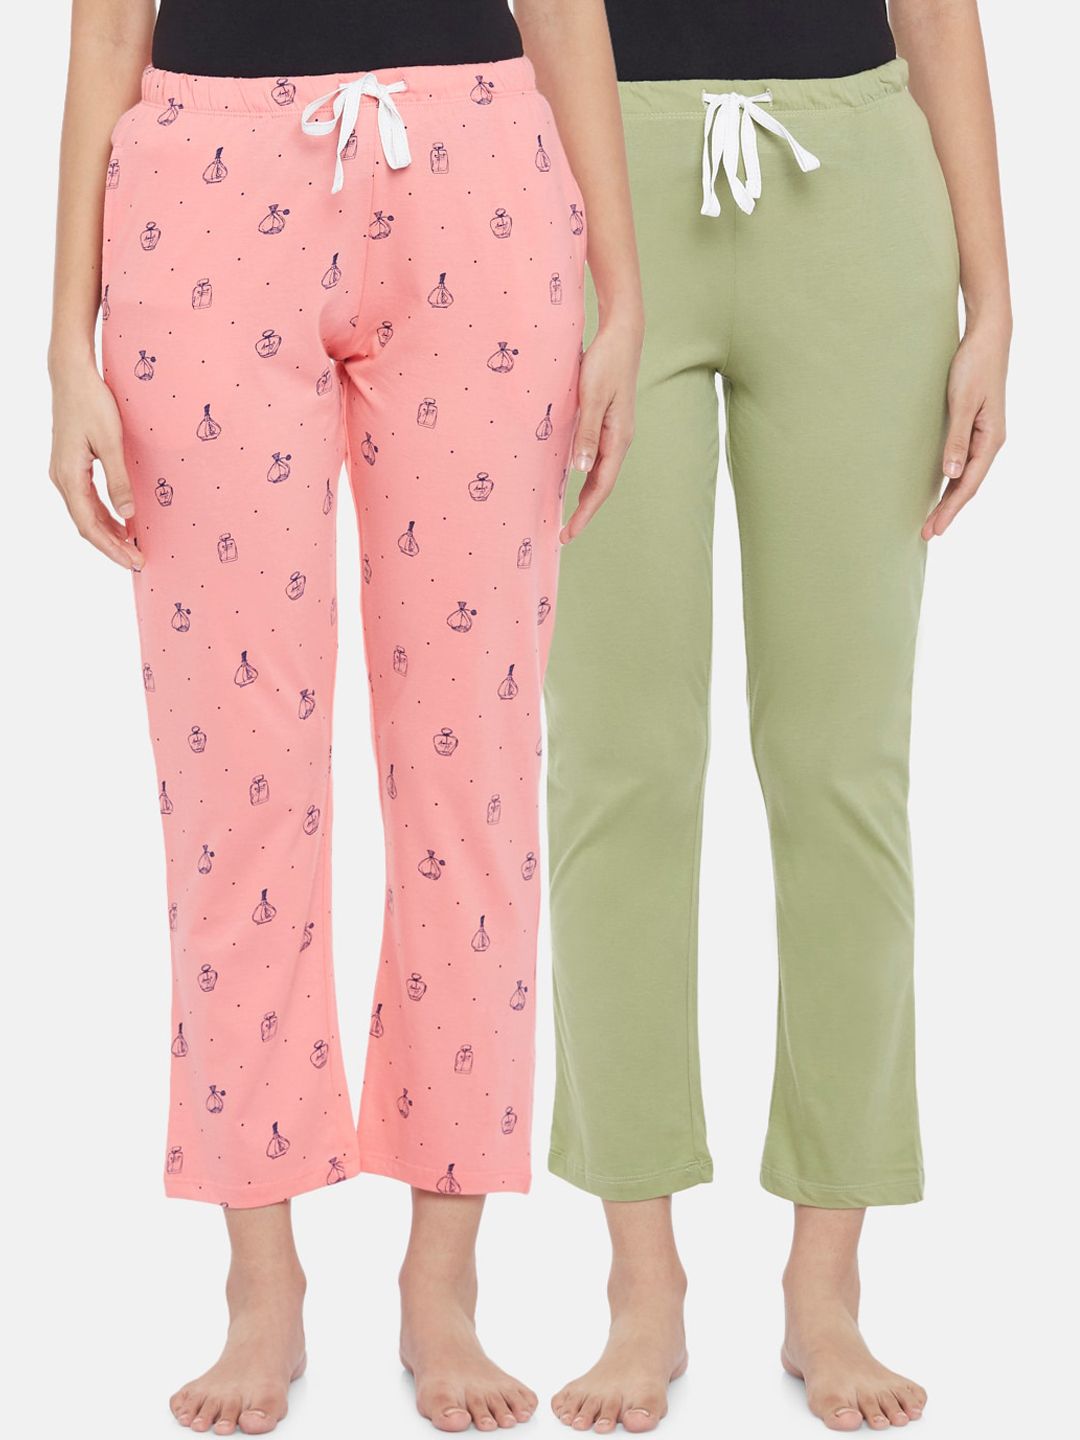 Dreamz by Pantaloons Women Pack Of 2 Green & Peach Printed Lounge Pants Price in India